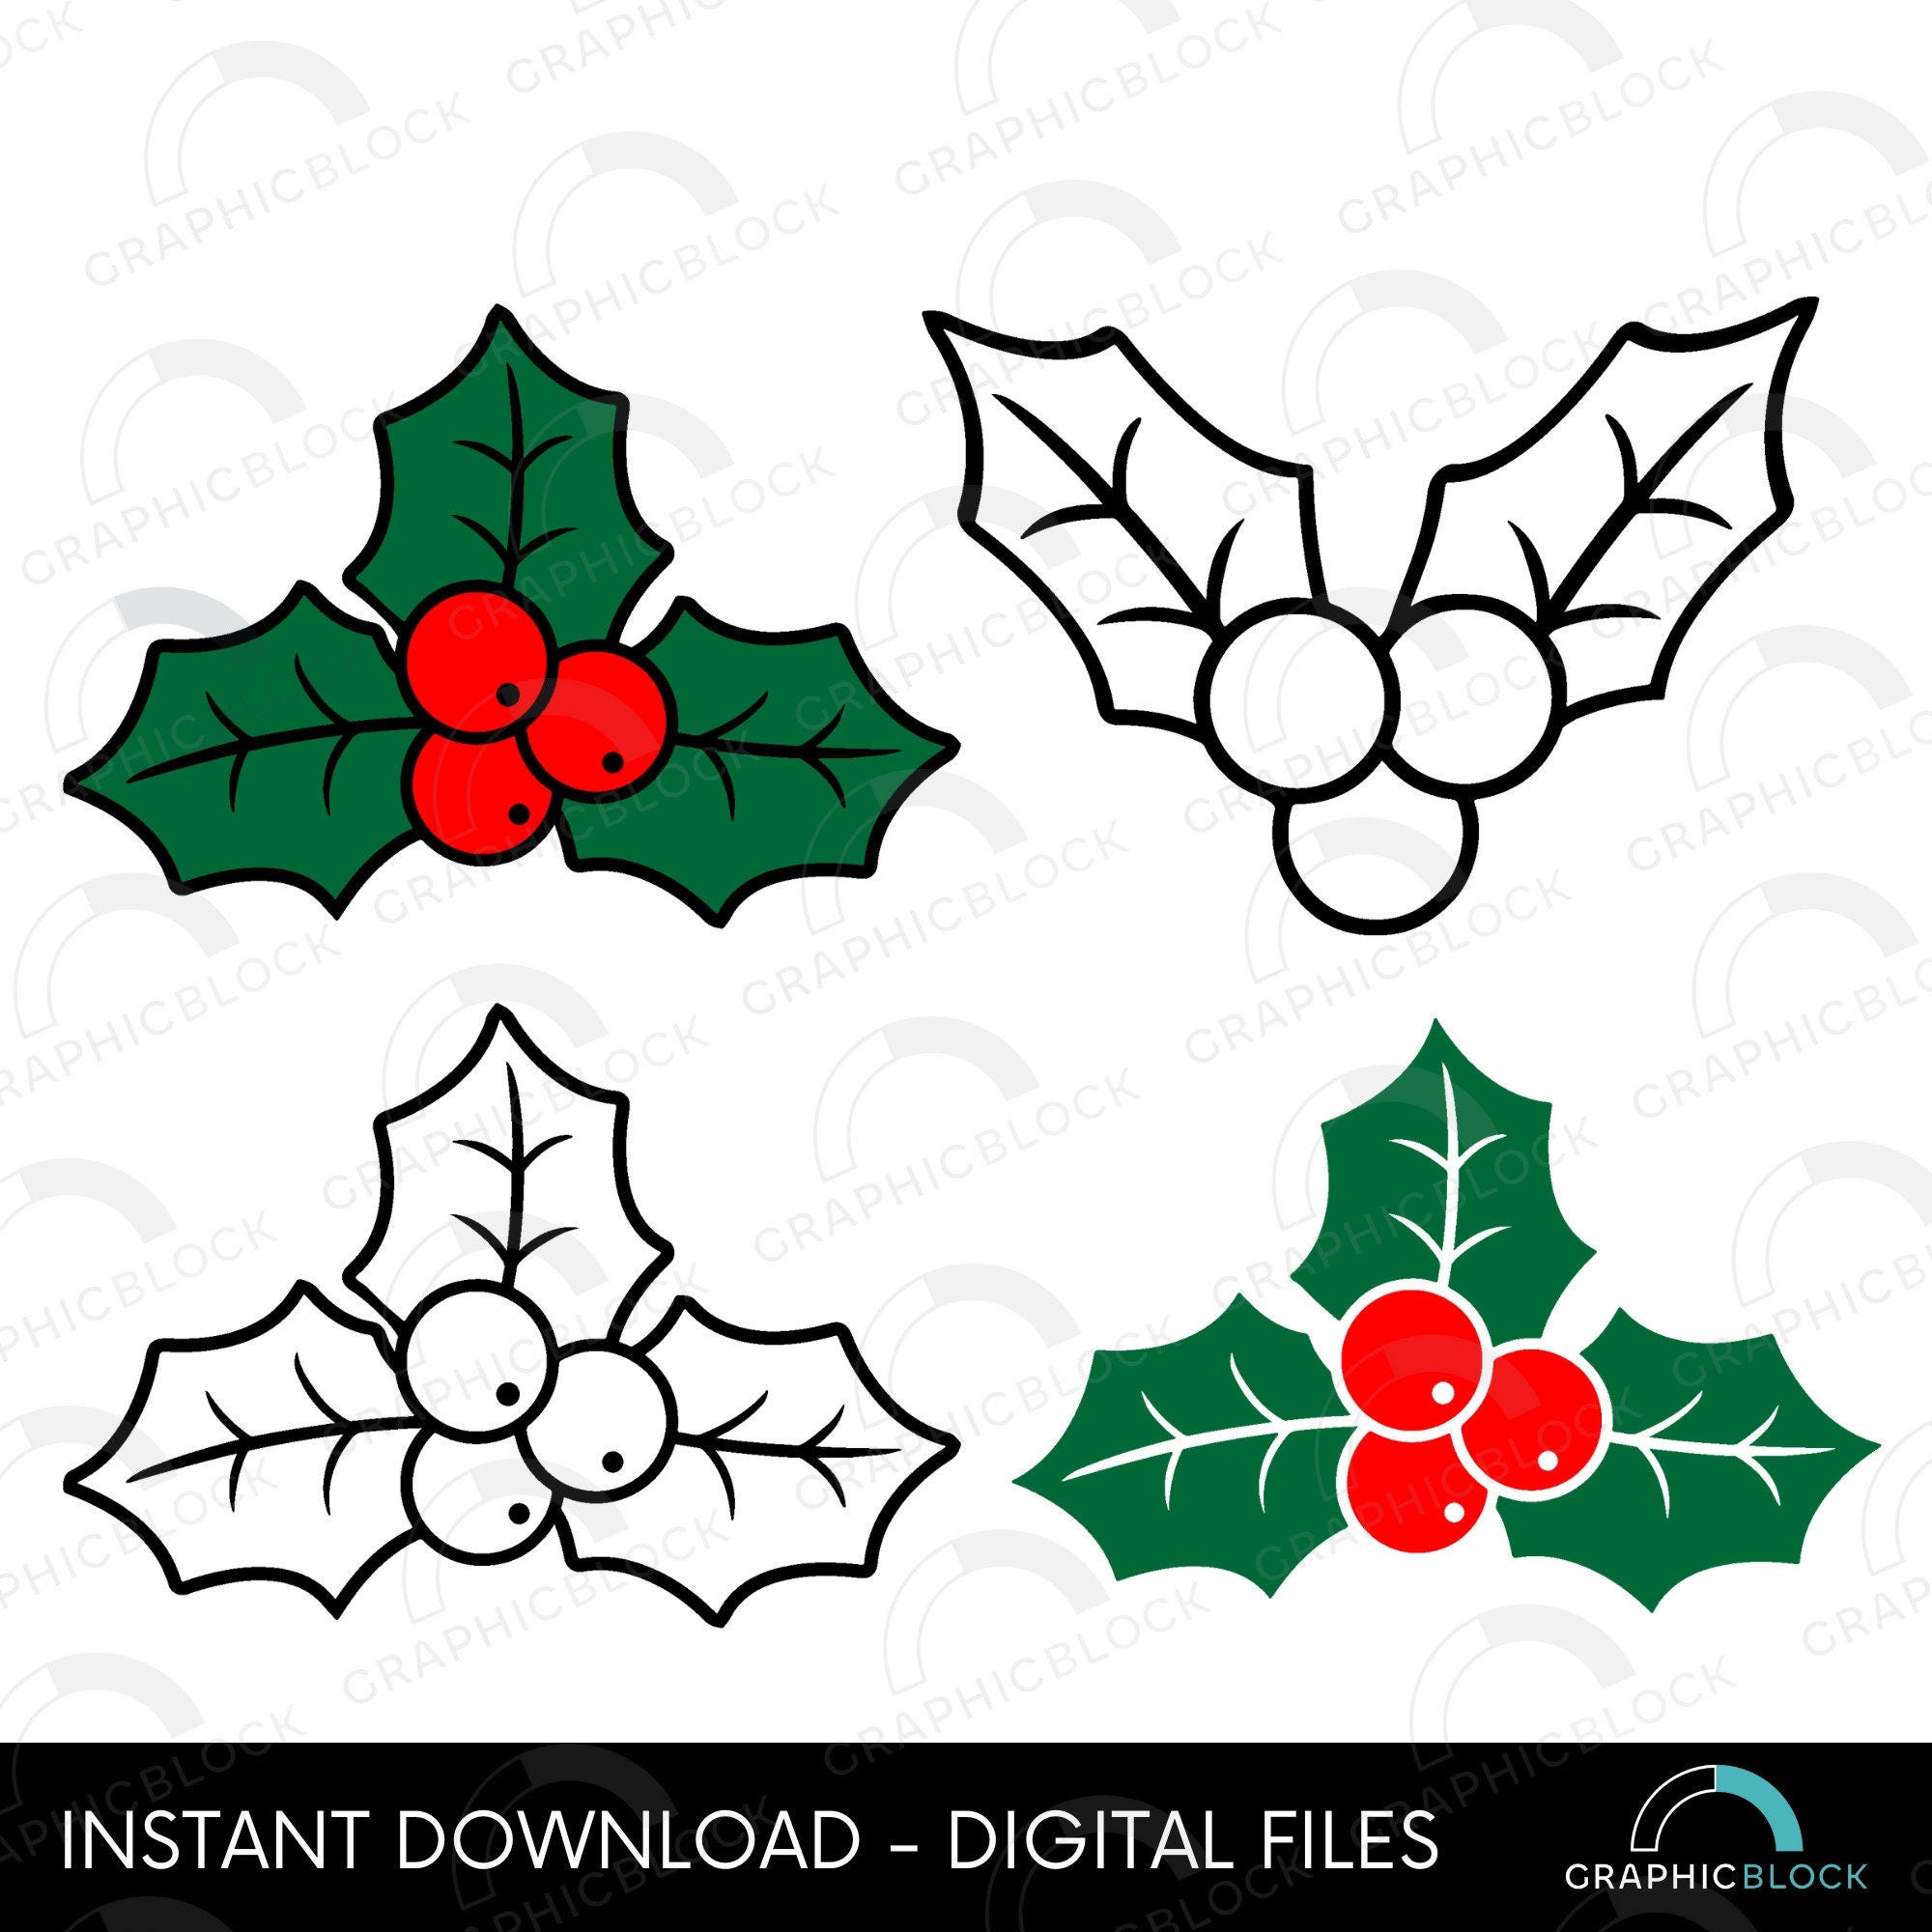 Christmas Holly SVG, Mistletoe Clip Art Cricut Silhouette Cut File, Winter Plant Vector Png Dxf Eps, Holly Berries Outline, Instant Download